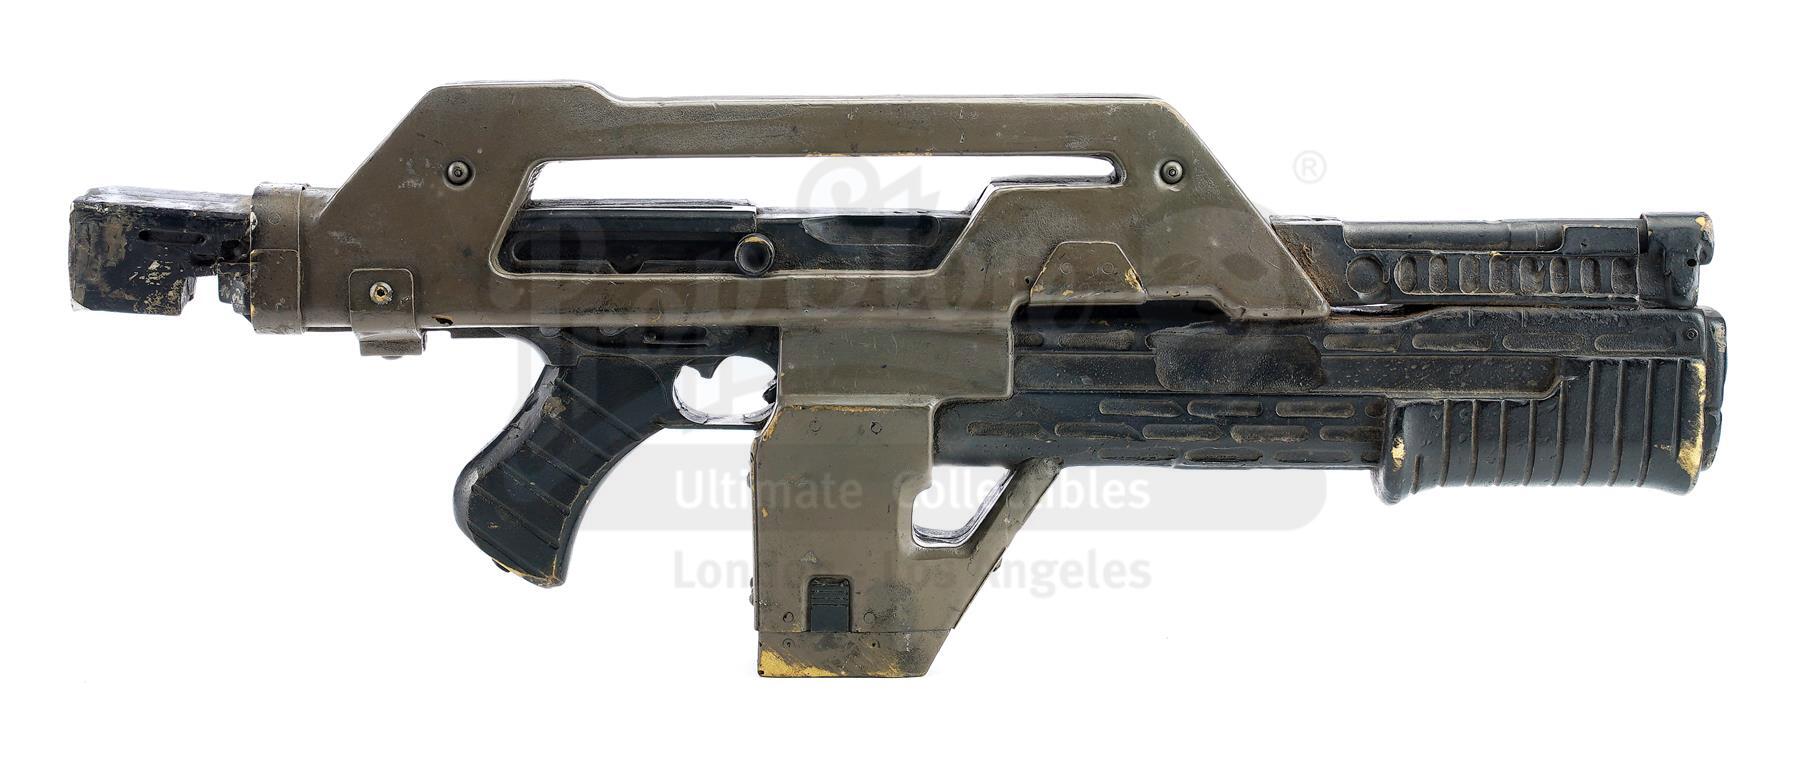 Lot # 7: ALIENS - Vasquez's (Jeanette Goldstein) Screen-Matched Lightweight M-41A Pulse Rifle